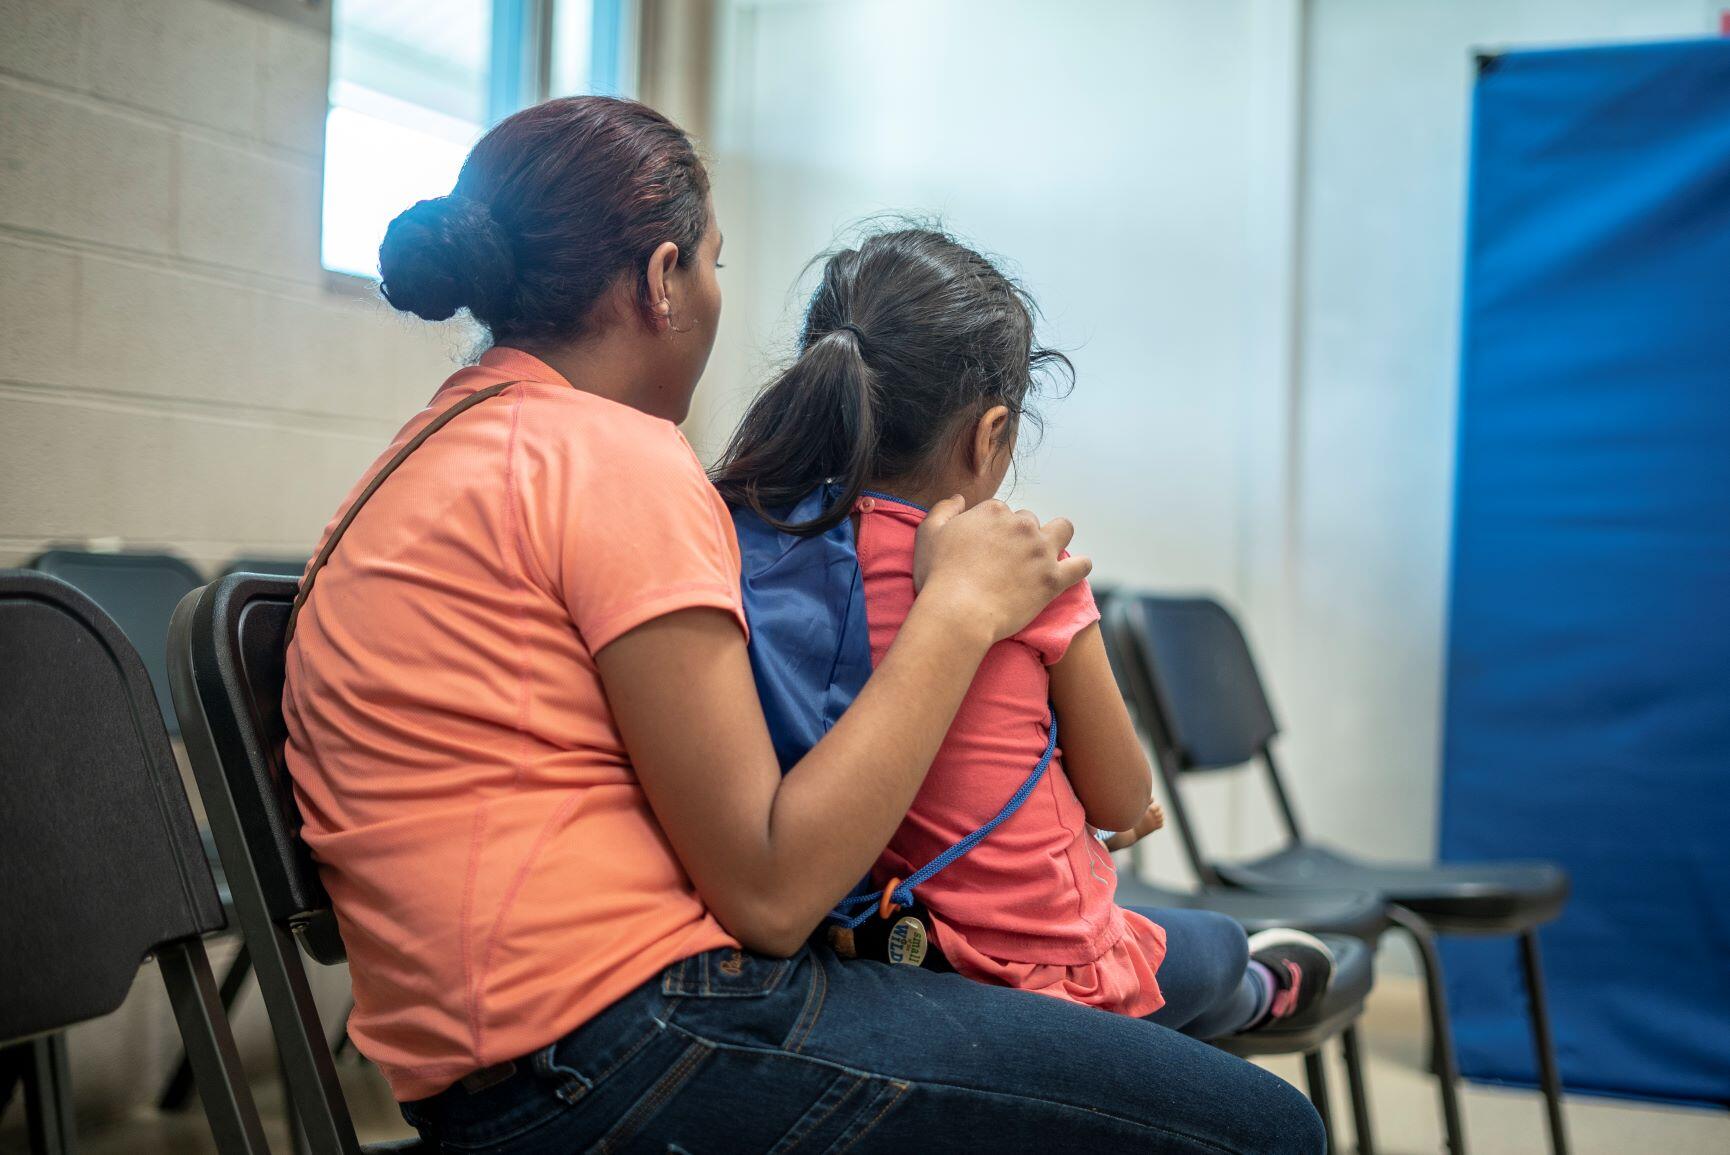 Emilia, 21, and her 4-year-old daughter at the shelter in Phoenix where the IRC welcomed them after they were detained while fleeing to the U.S. from Honduras.